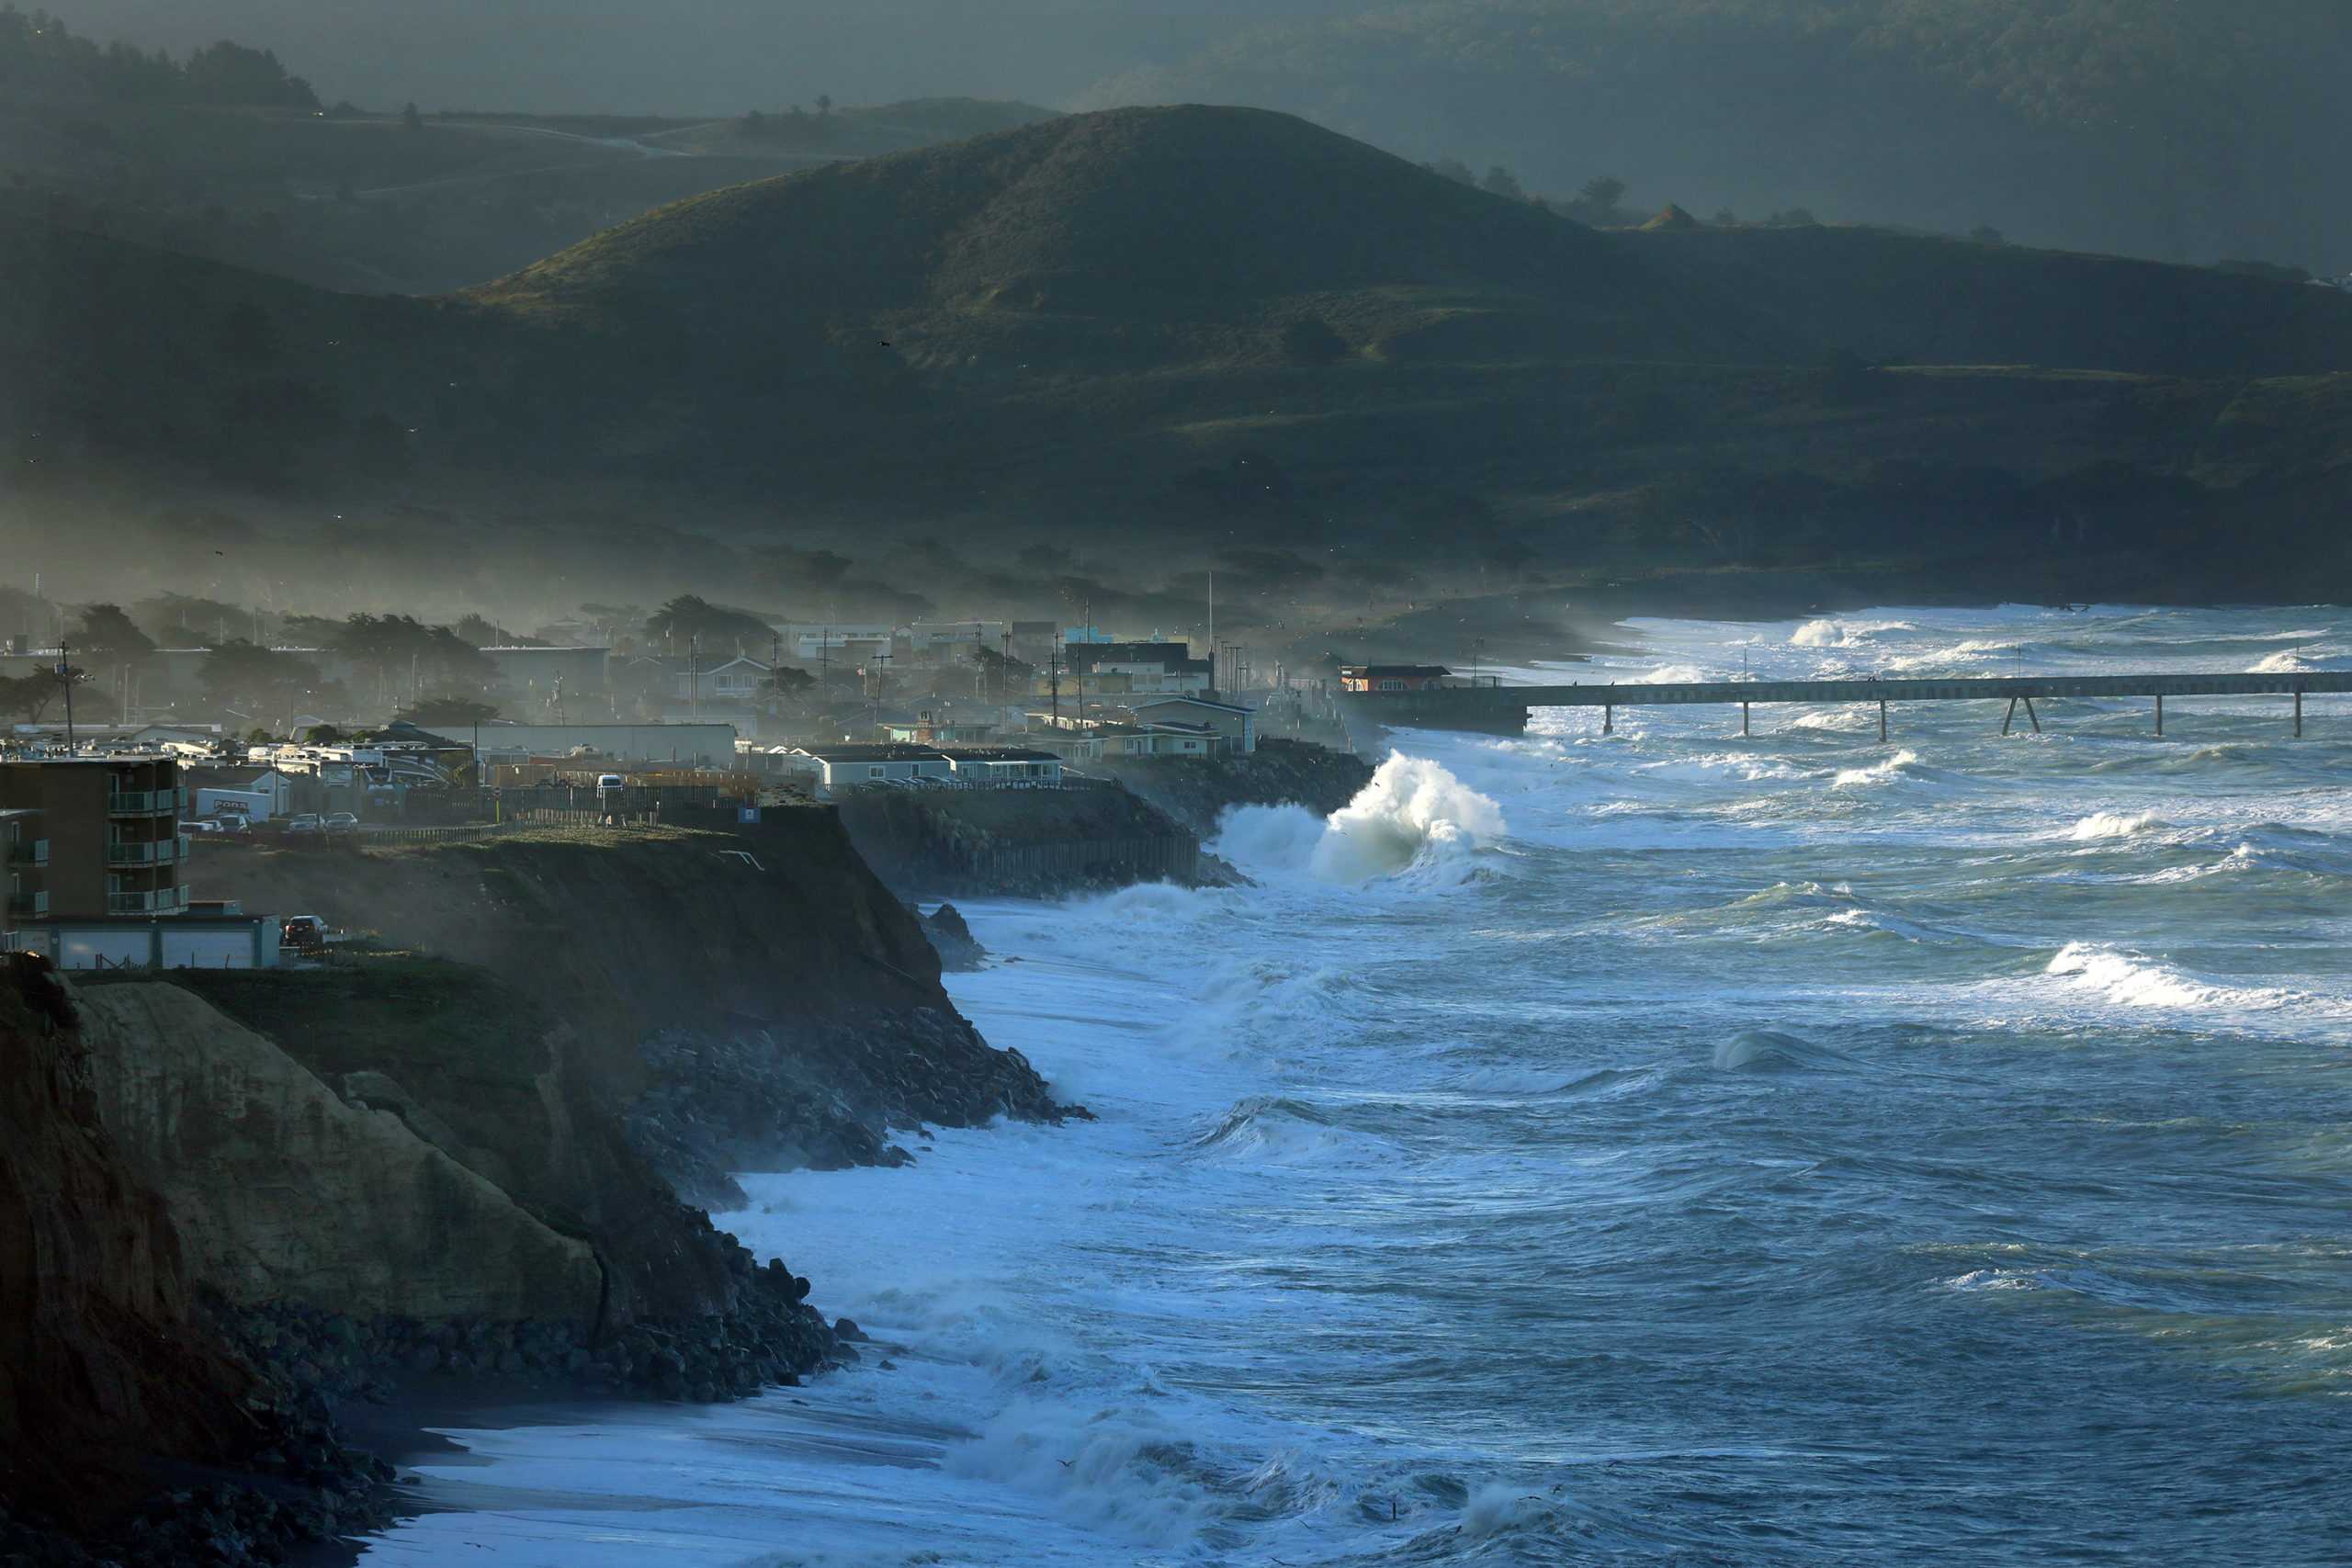 The town of Pacifica, just south of San Francisco, is ground zero for the issue of coastal erosion. On Jan. 20-21, the combination of ocean surge and a king tide caused high waves. Some homes and apartment building have already been lost to the forces of nature. (Carolyn Cole/Los Angeles Times/TNS)